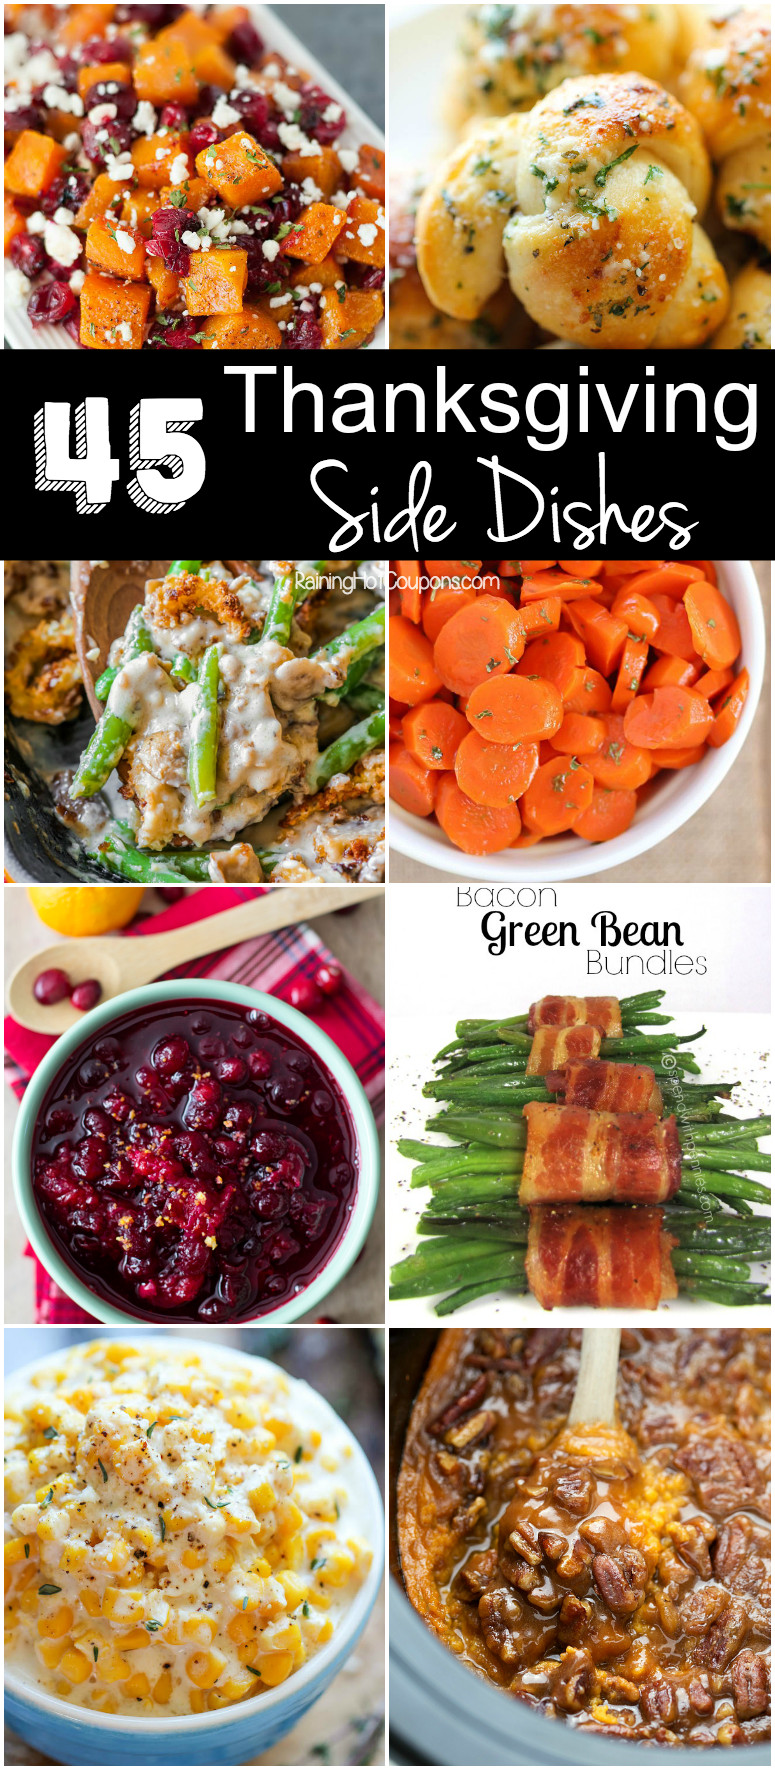 Best Side Dishes For Thanksgiving
 45 Thanksgiving Side Dishes